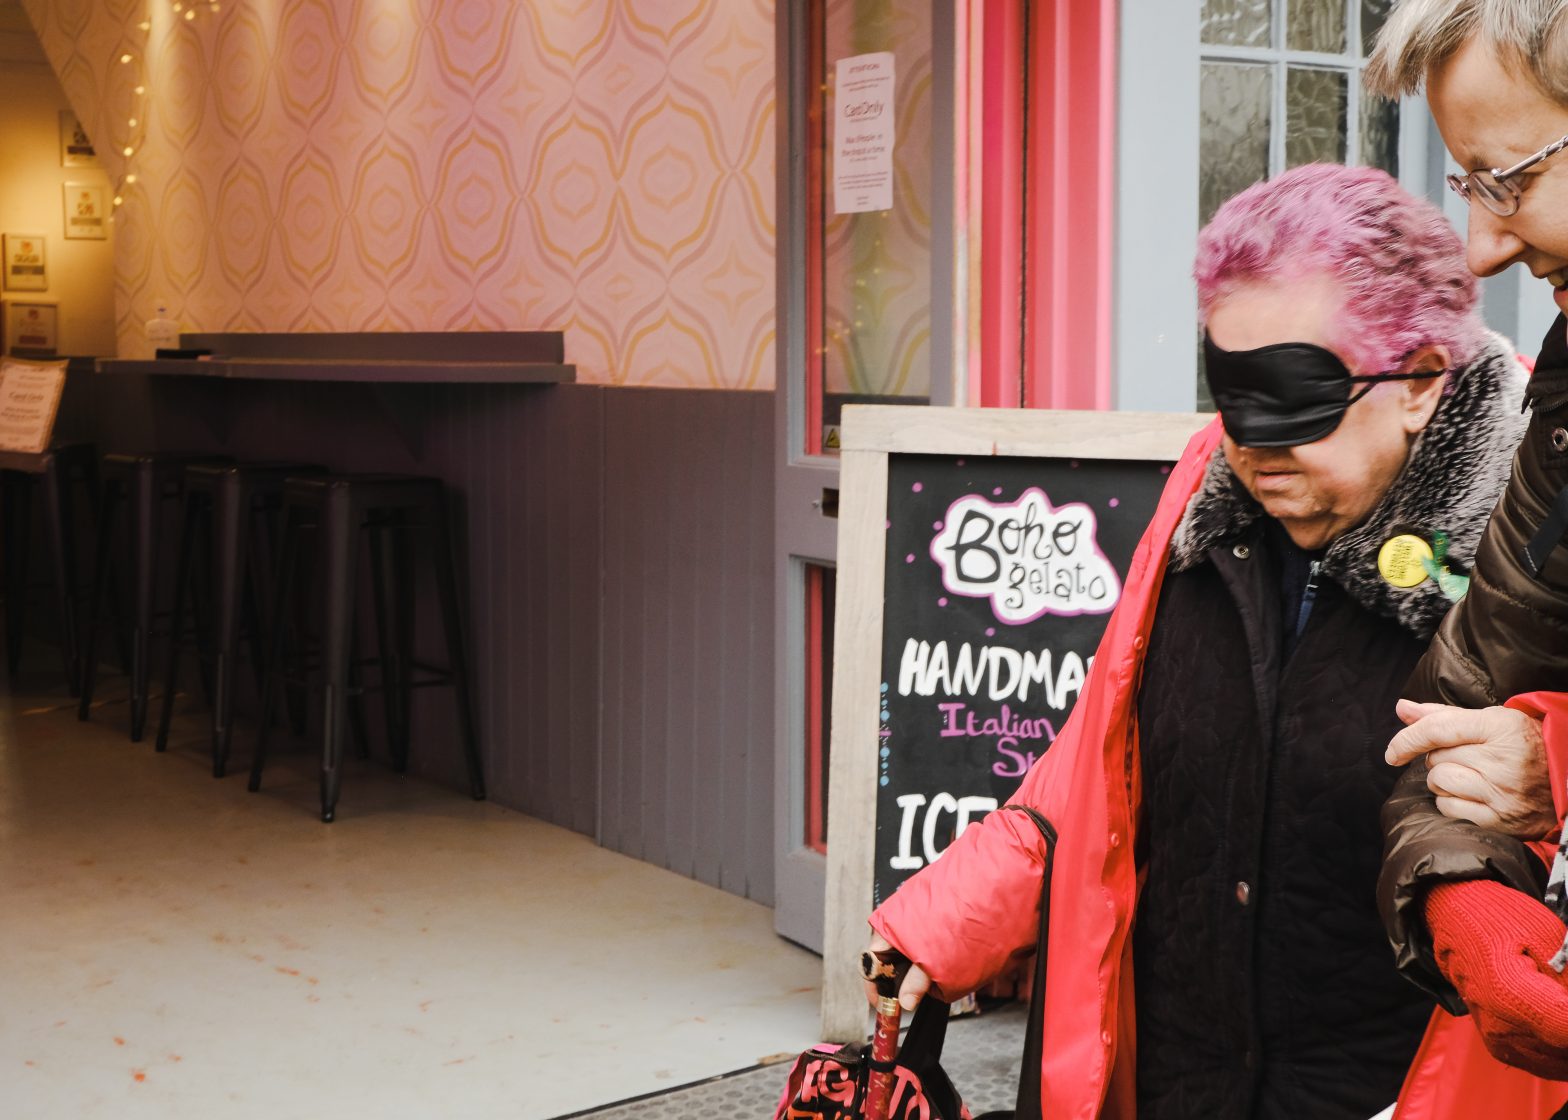 A woman with pink hair is wearing a blindfold. She is being guided by another woman outside an ice cream shop.